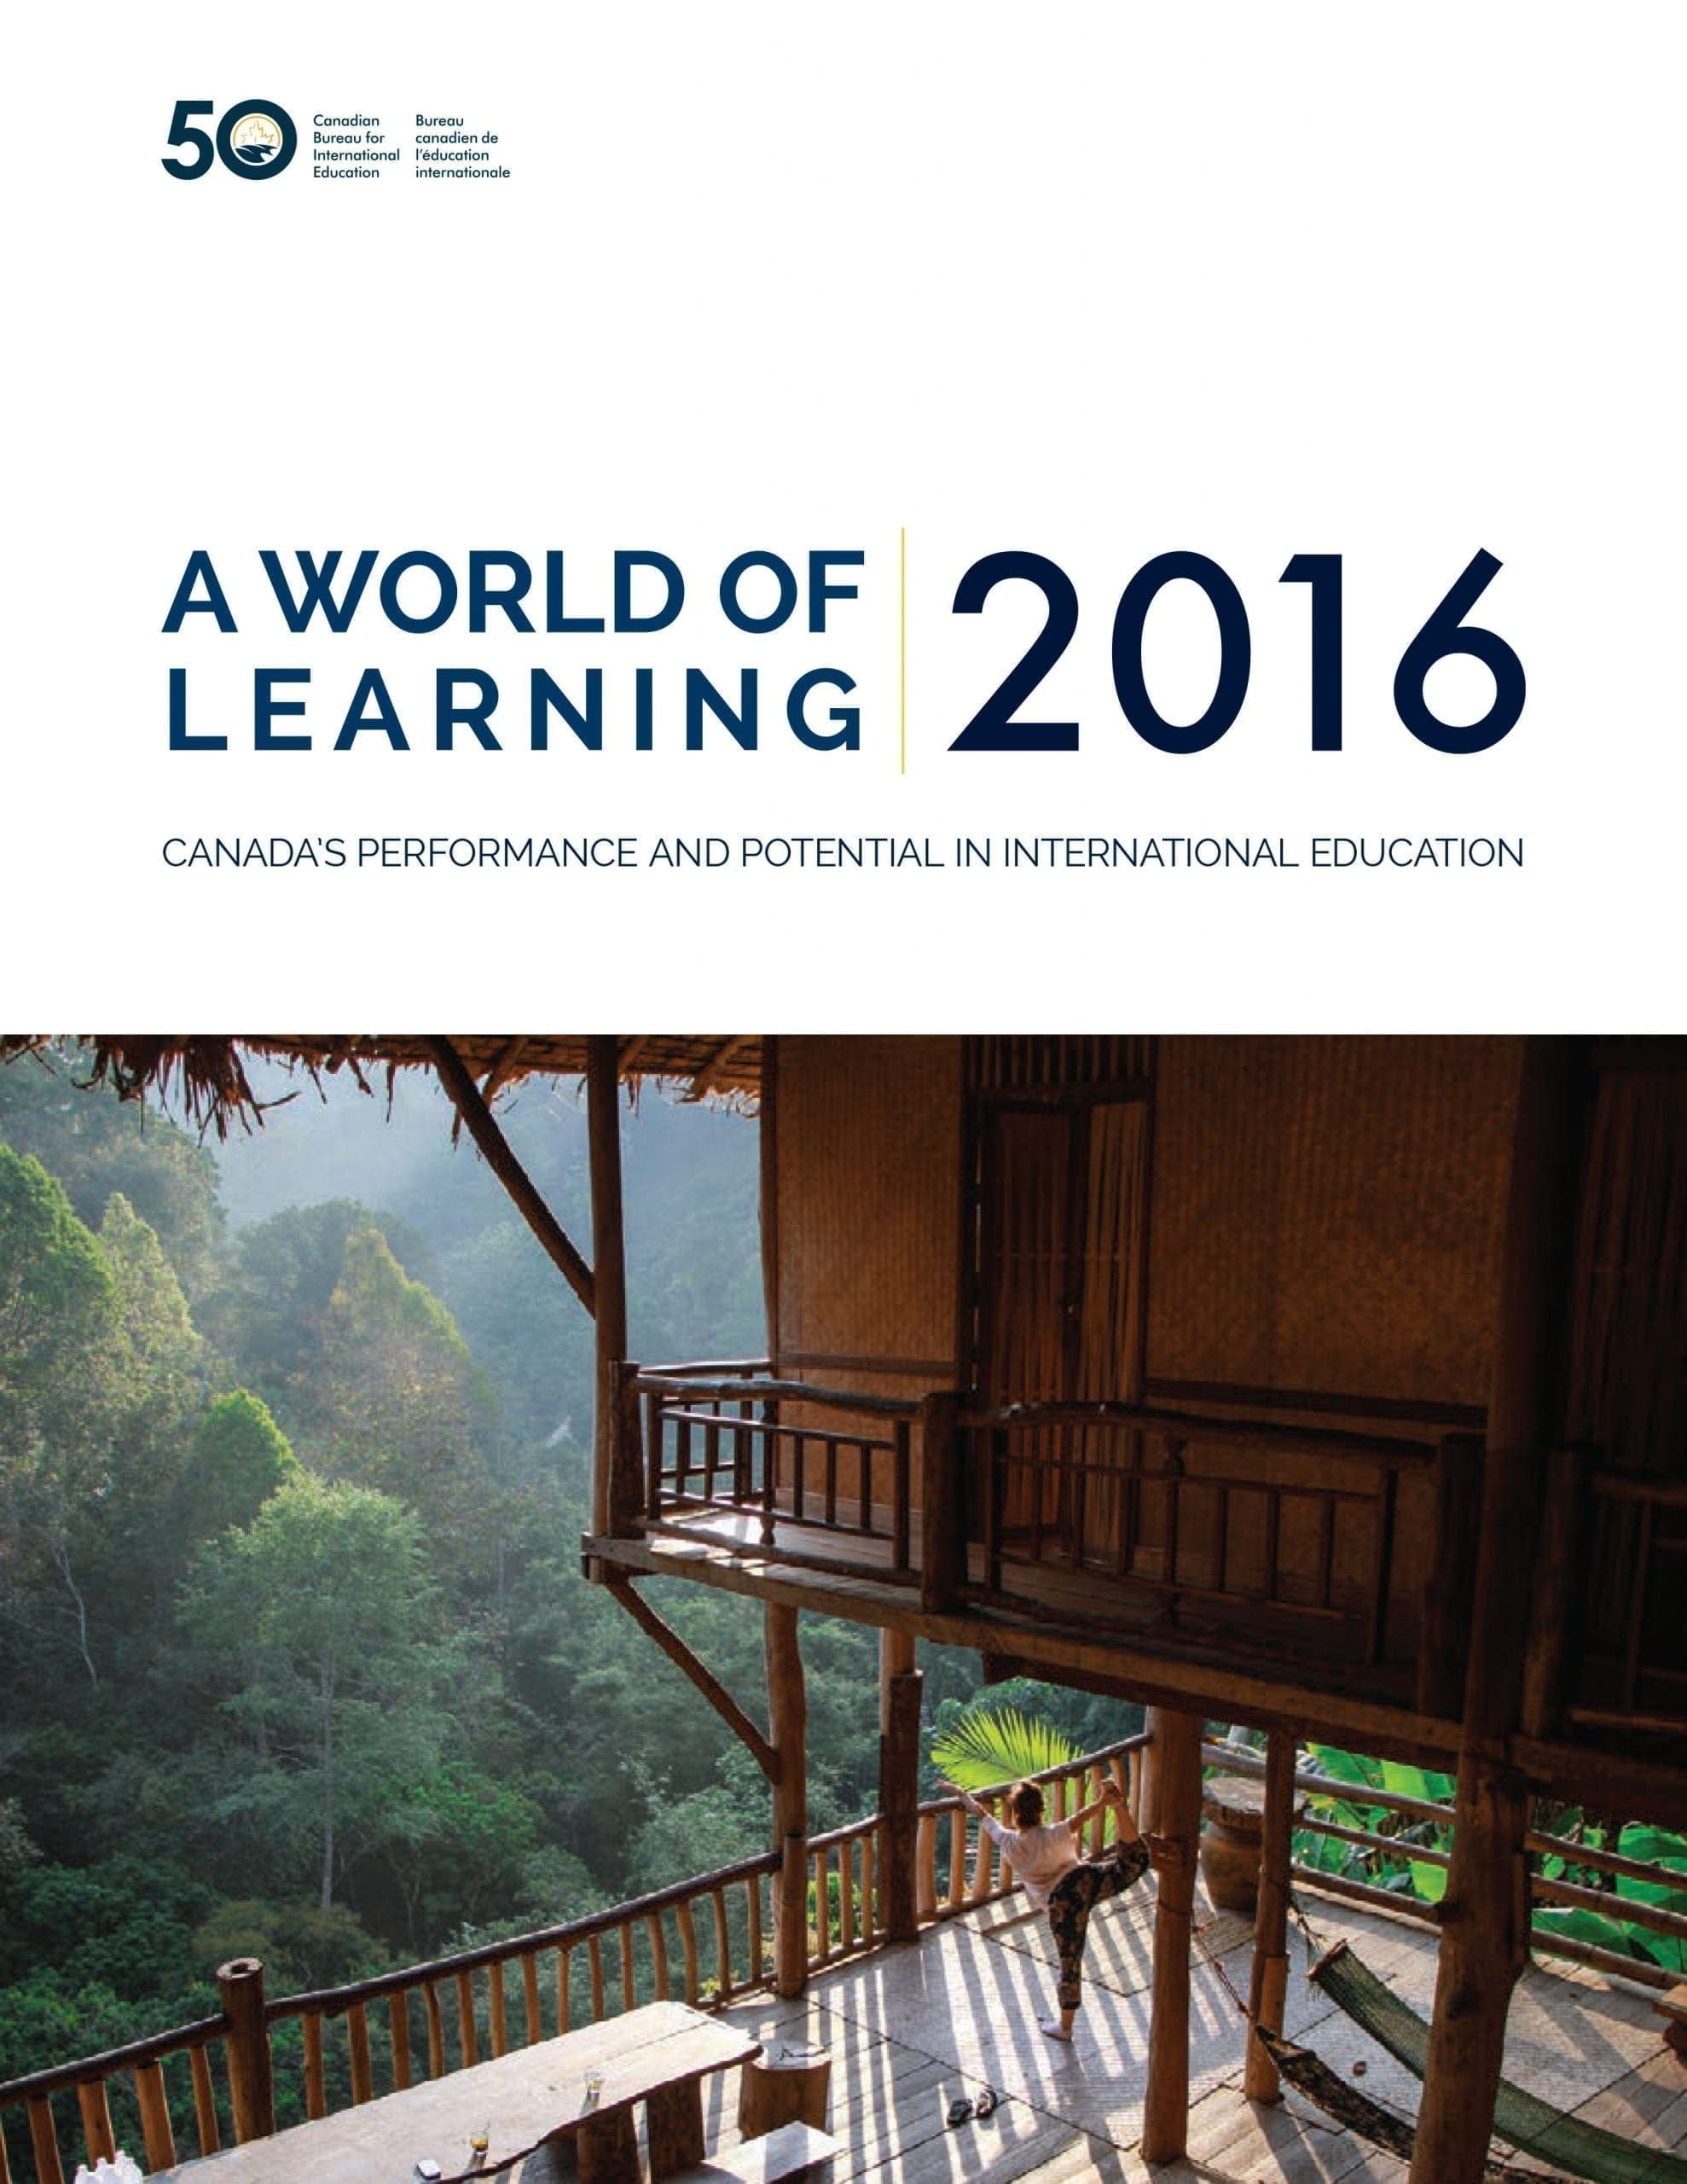 A World of Learning: Canada’s Performance and Potential in International Education